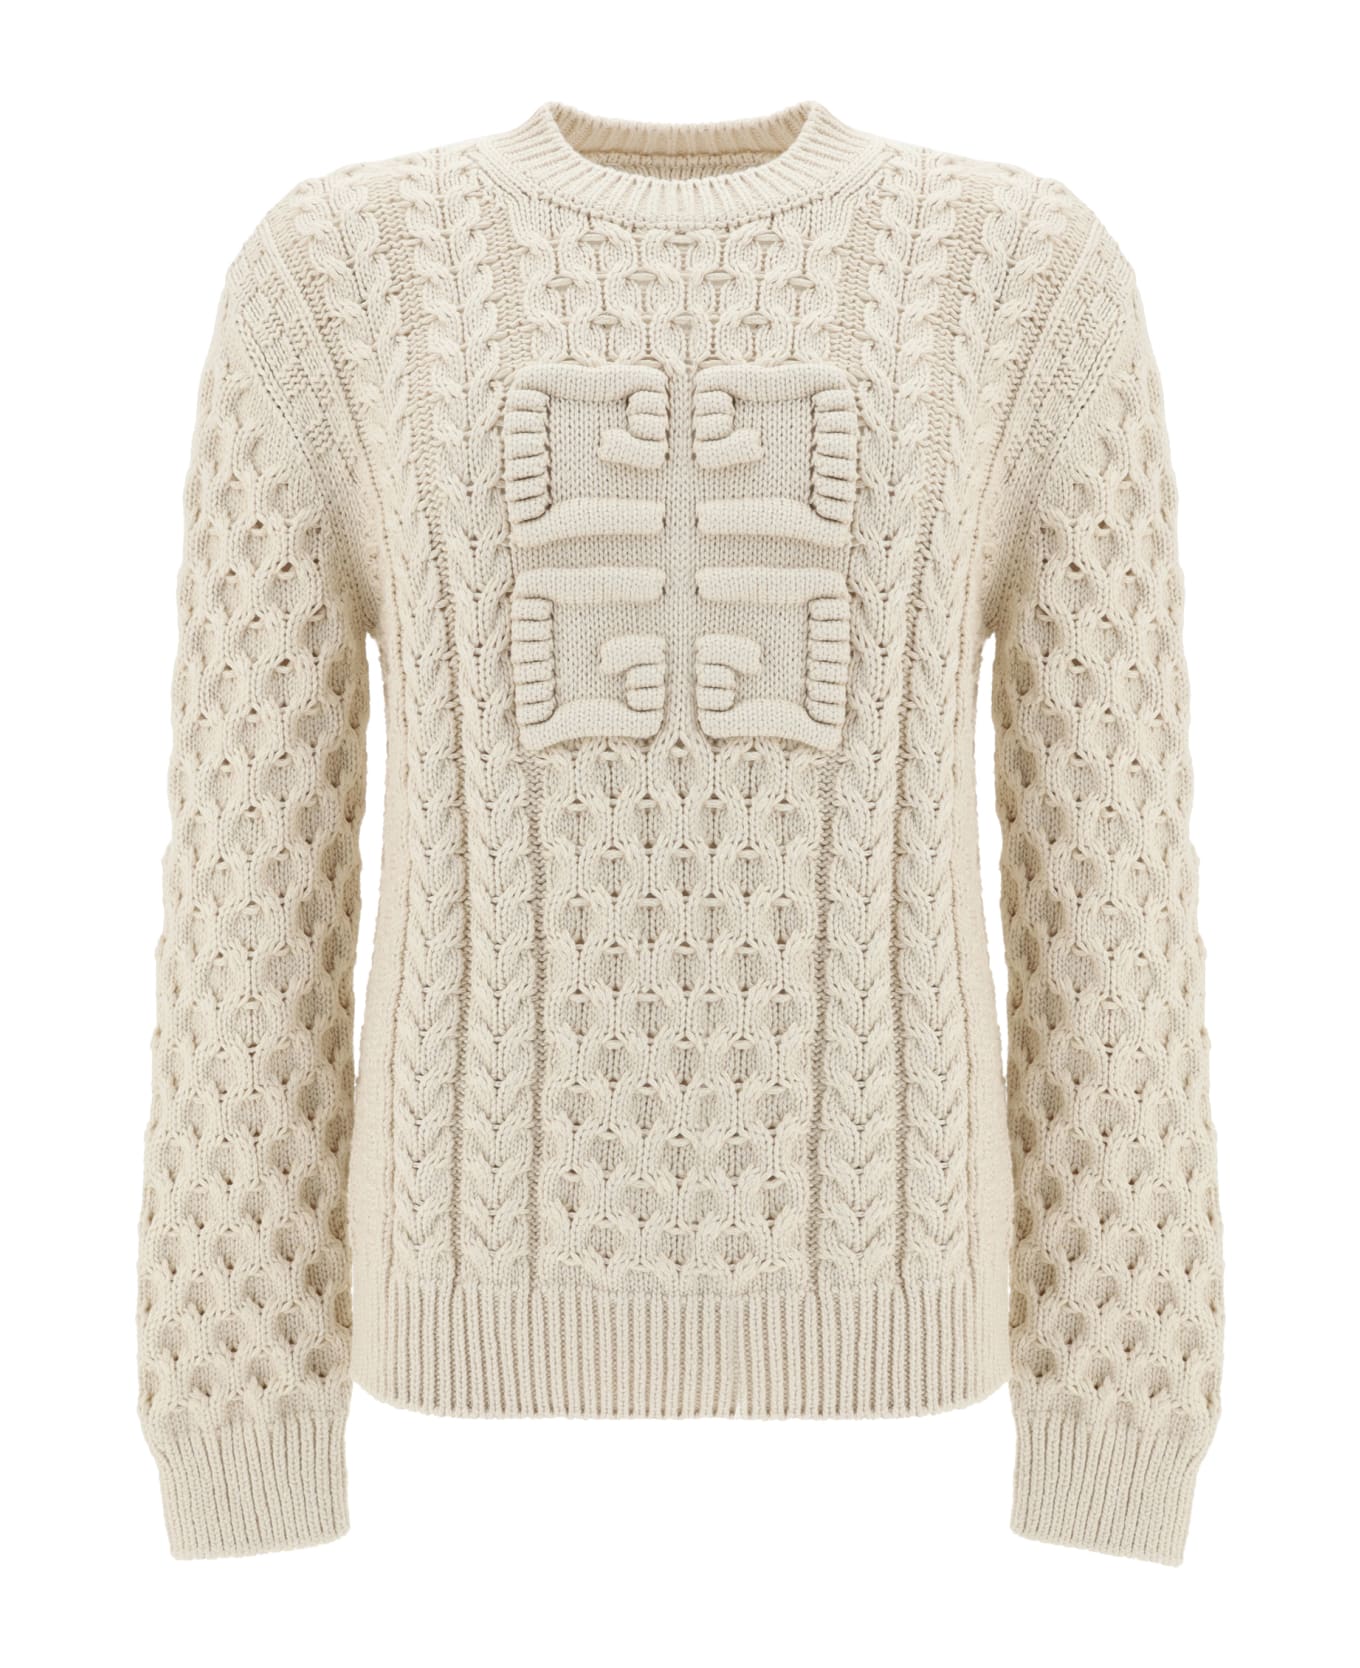 Givenchy 4g Knit Sweater - Beige